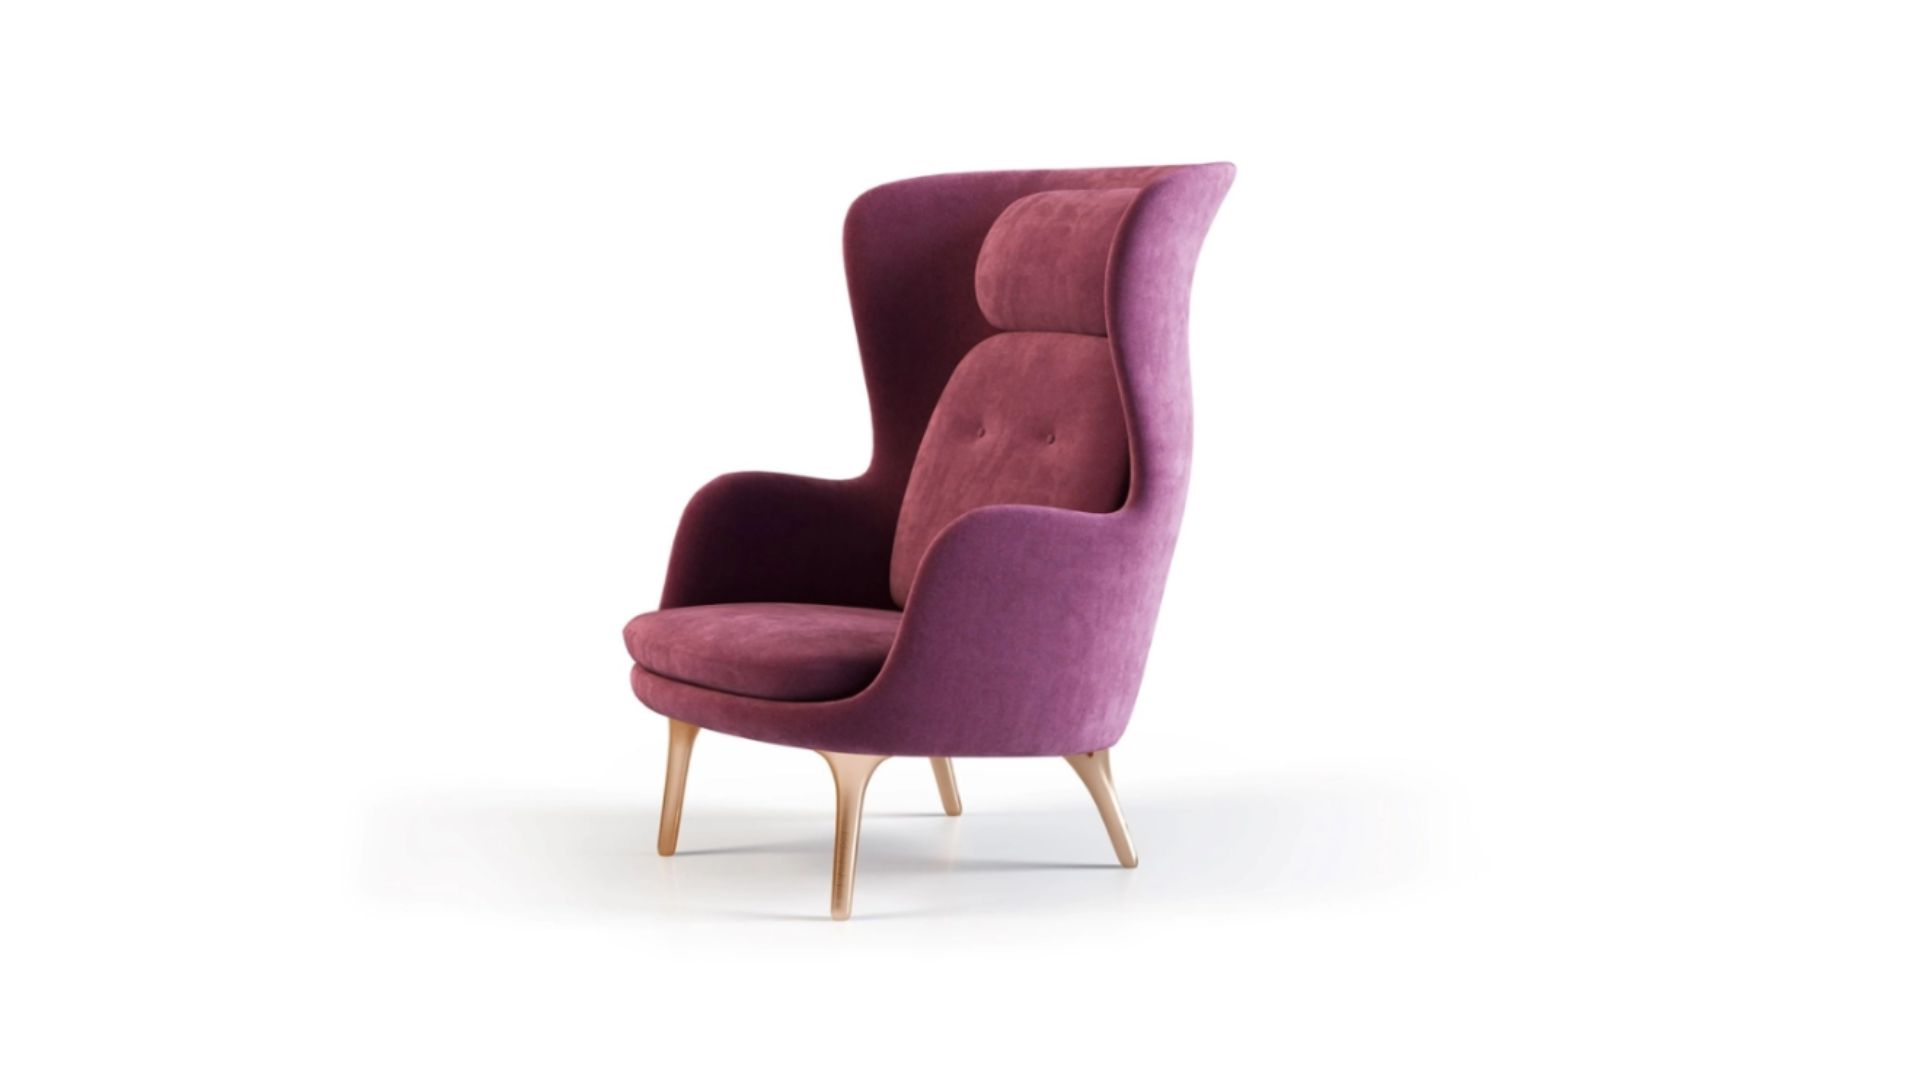 Silo Product Image For Pink Chair